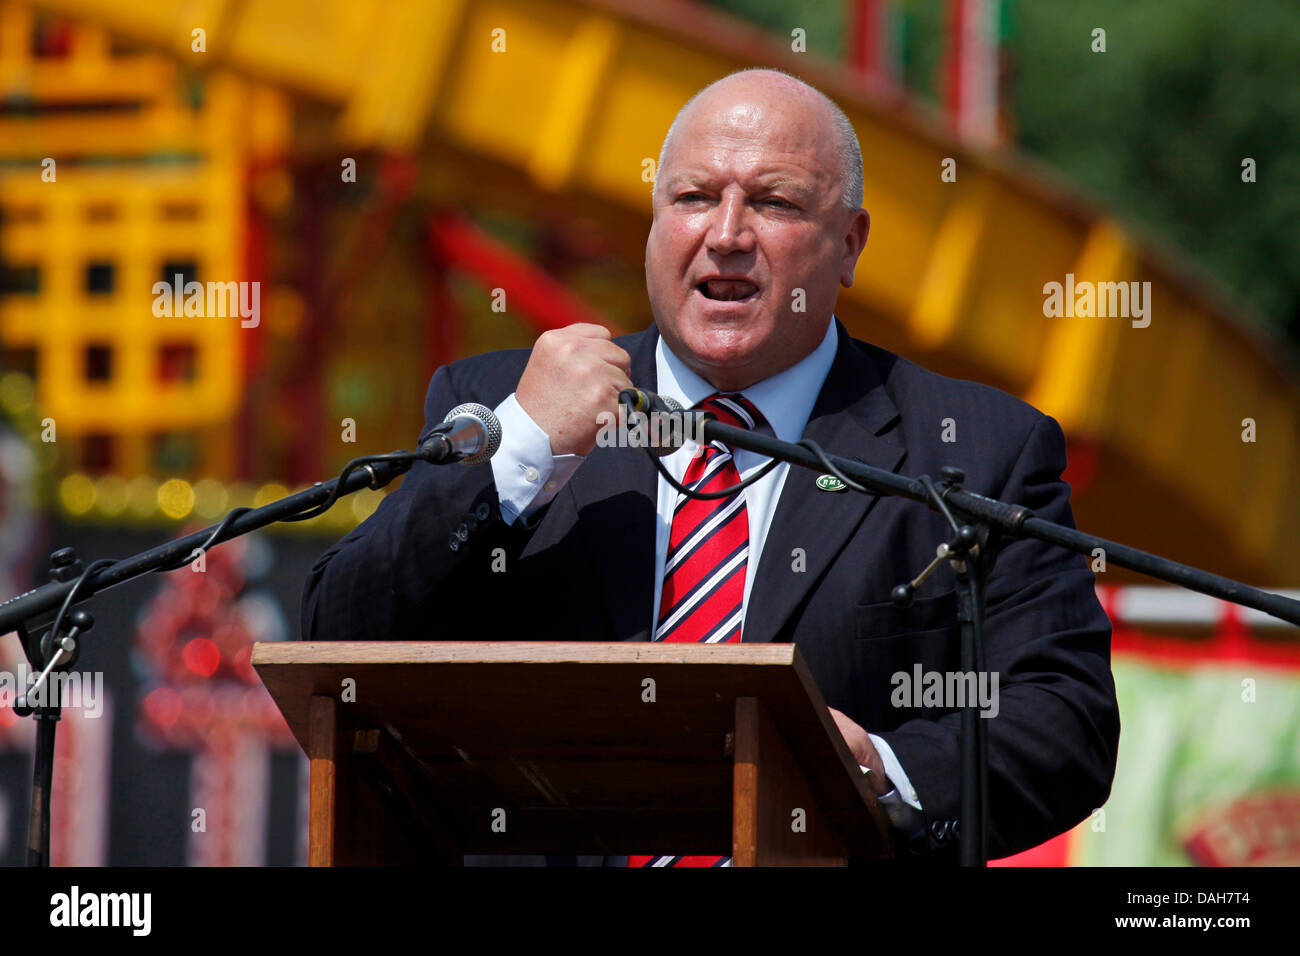 Bob Crow speaking at the 129th Durham Miners Gala at Durham, England. Crow is the General Secretary of the National Union of Rail, Maritime and Transport Workers (RMT). Stock Photo